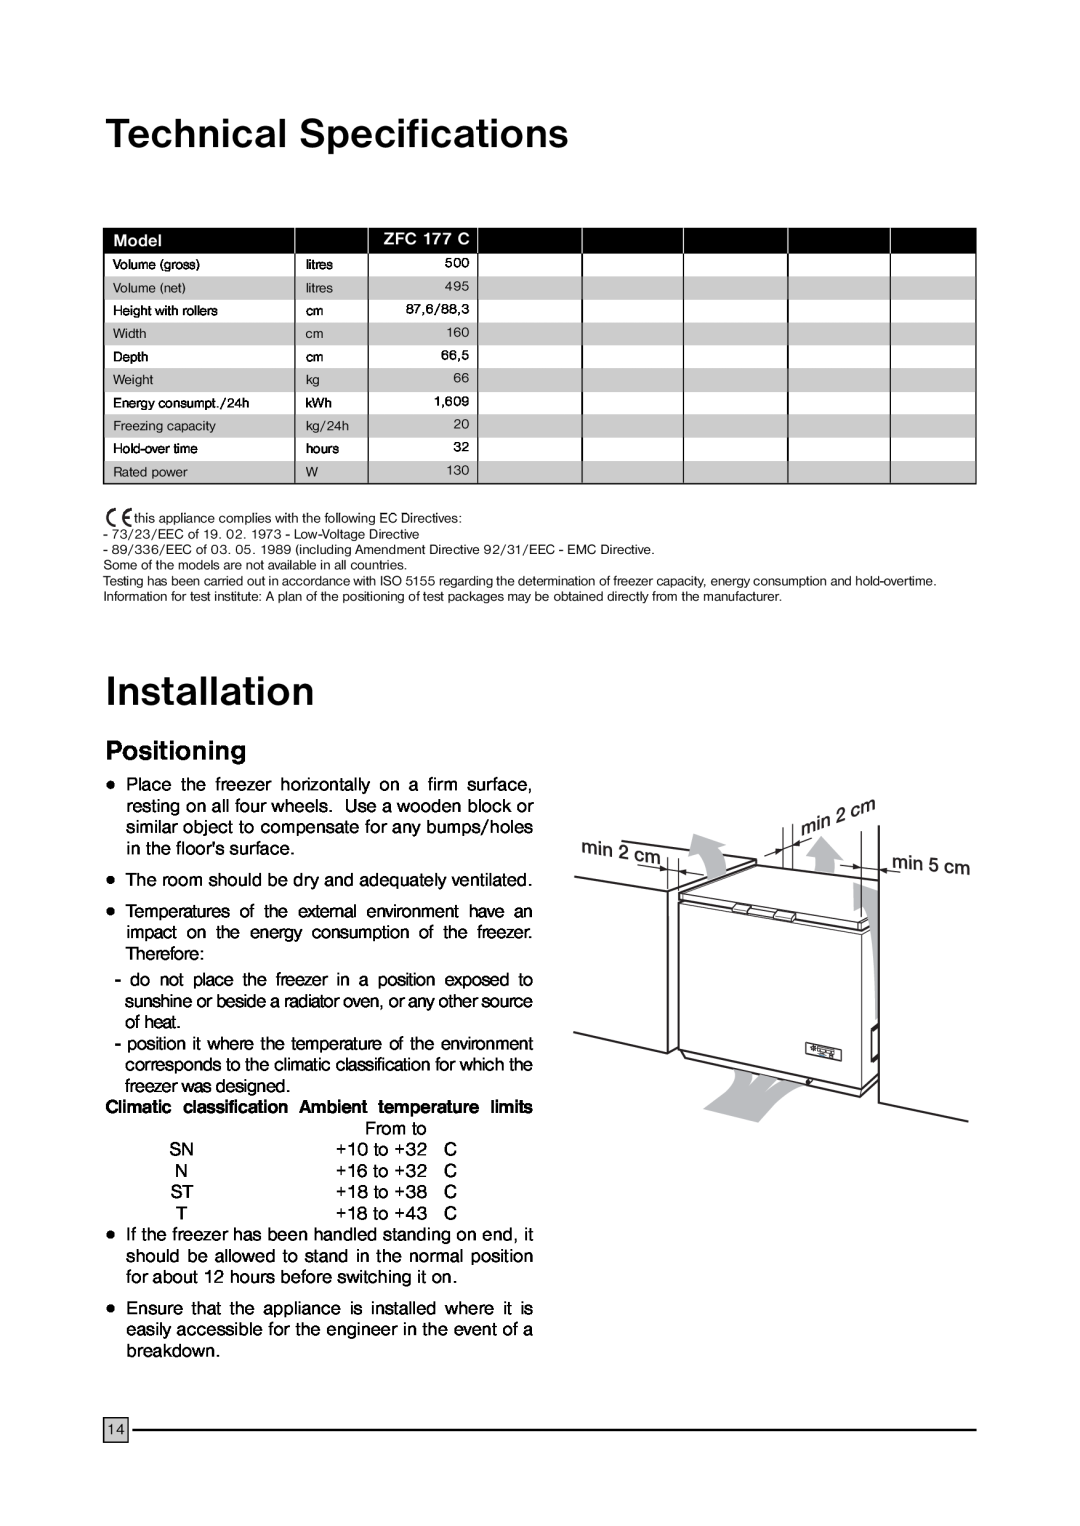 Zanussi ZFC 177 C installation manual Technical Specifications, Installation, Positioning, Model 